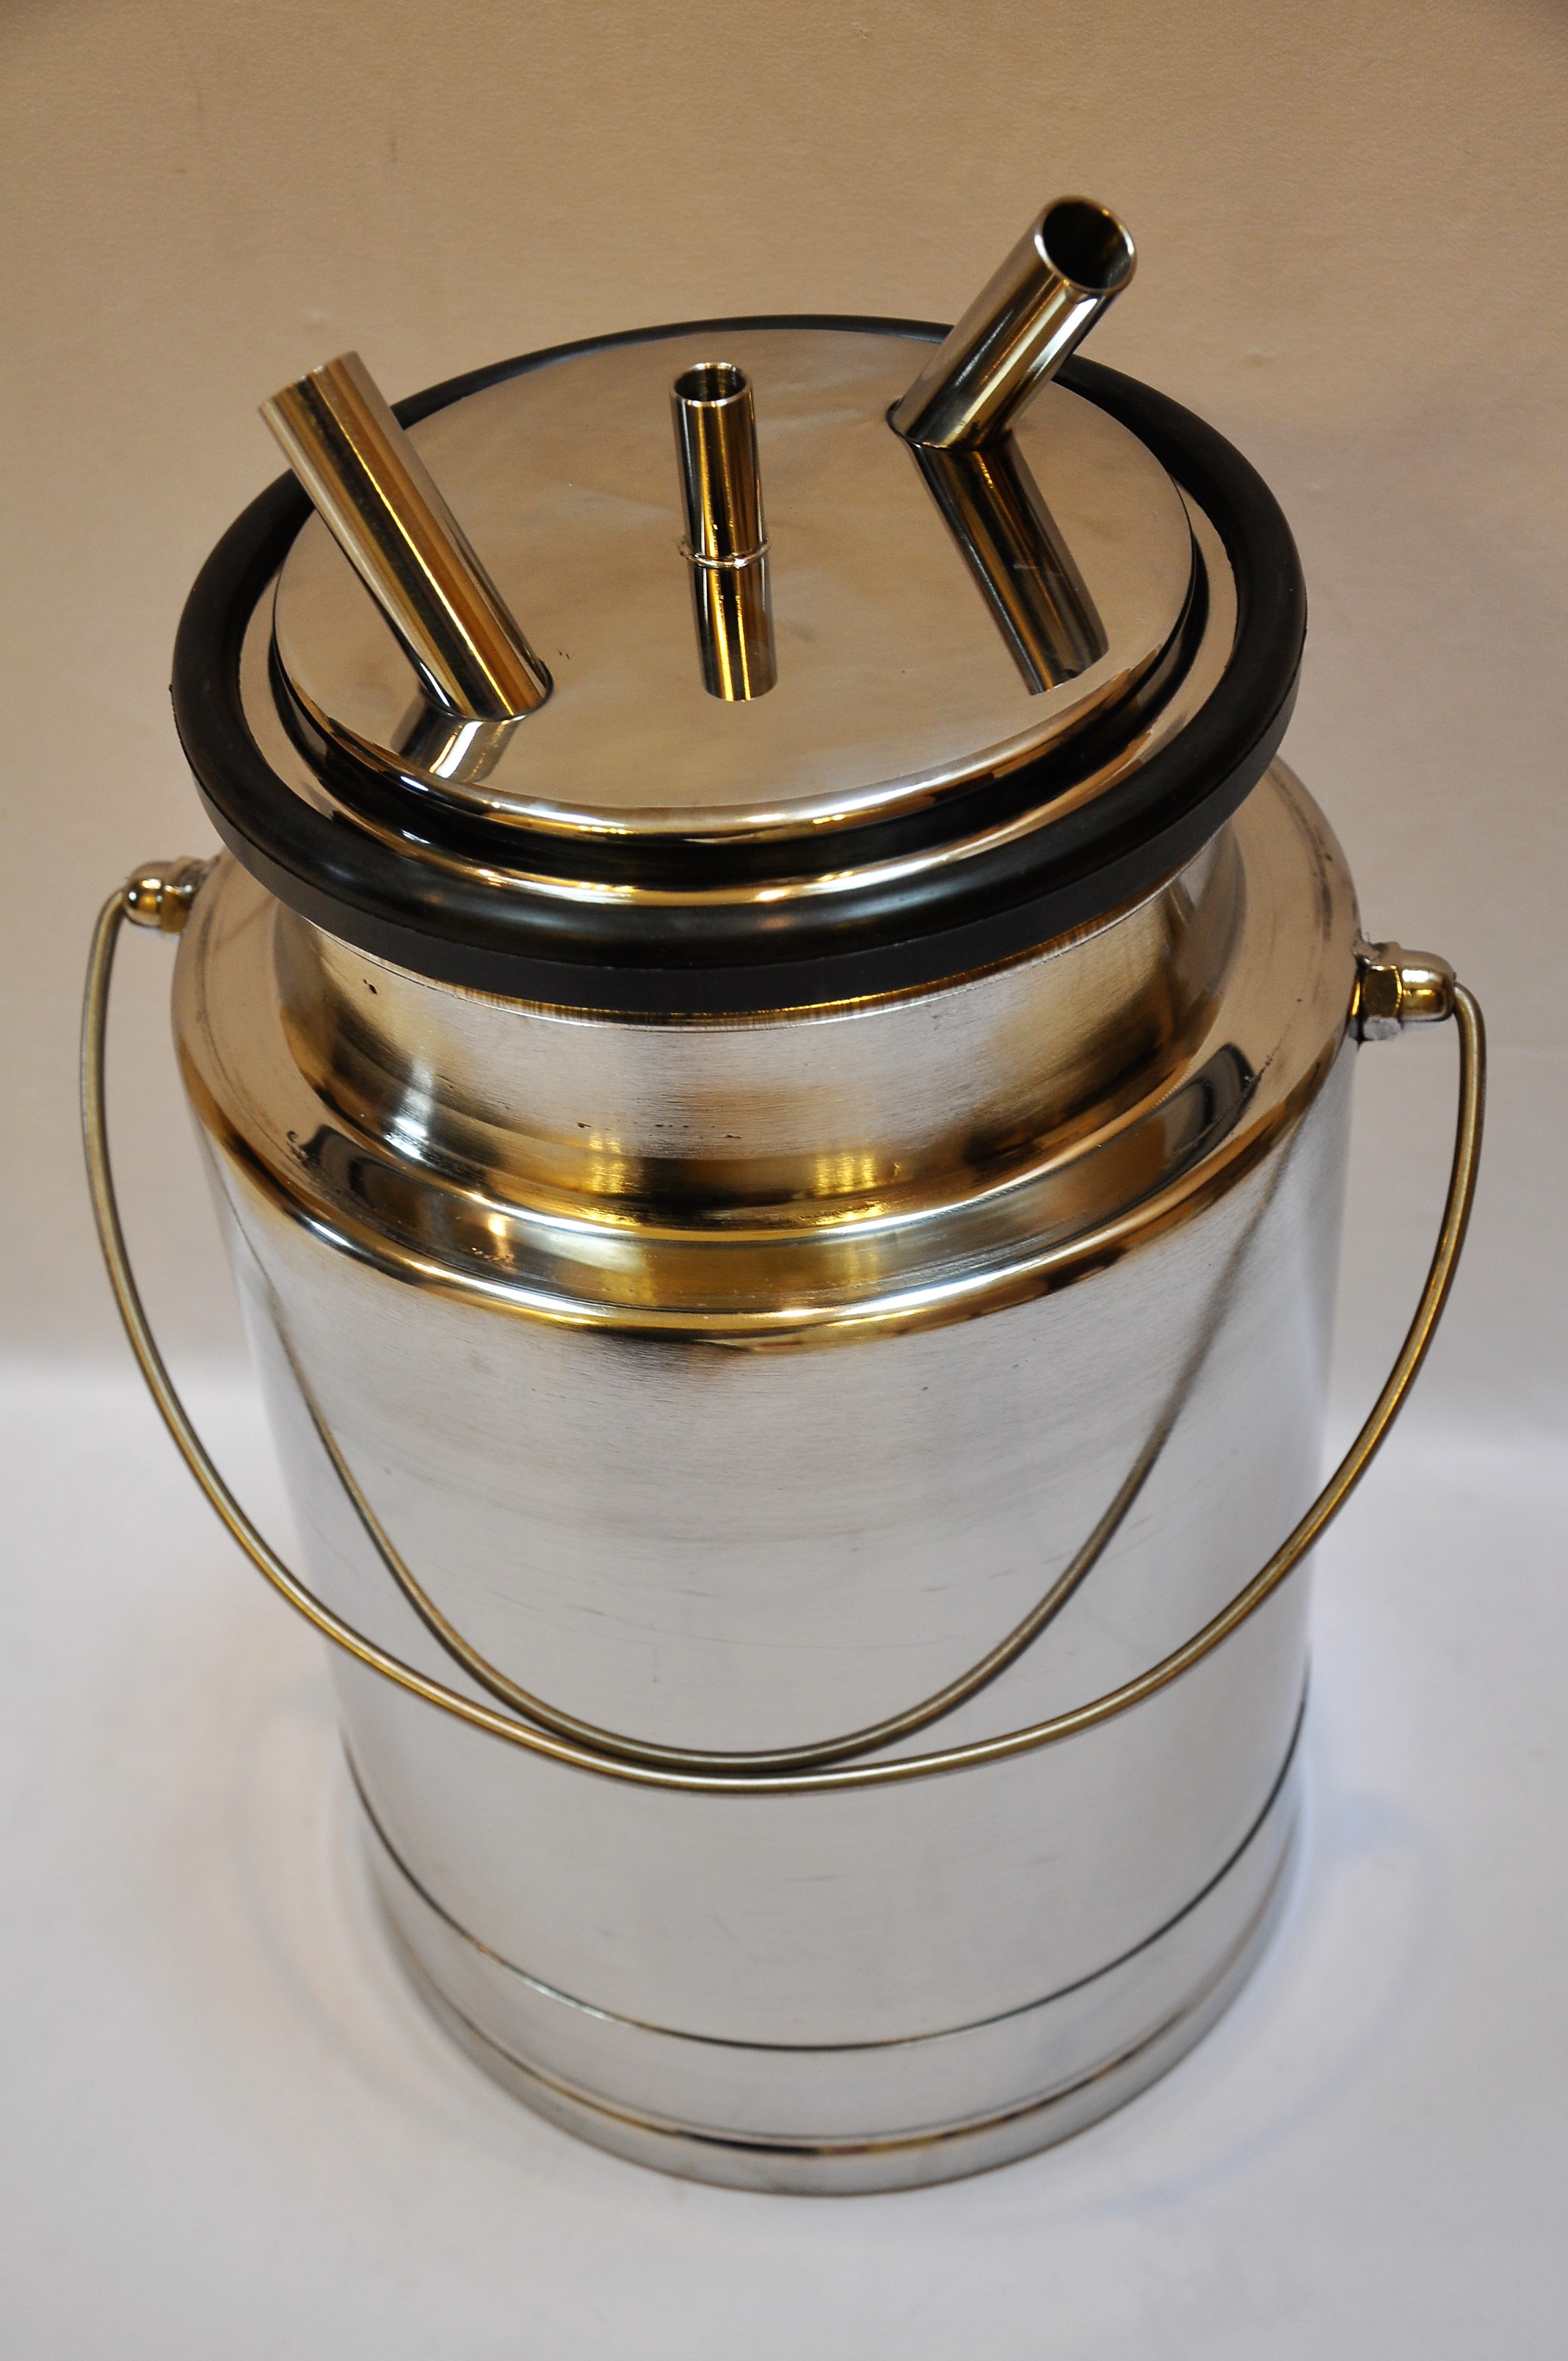 Milker Bucket with Lid and Liner: 10 Liter SS Bucket with SS lid and Heavy Duty Rubber Liner for cow or goat milking